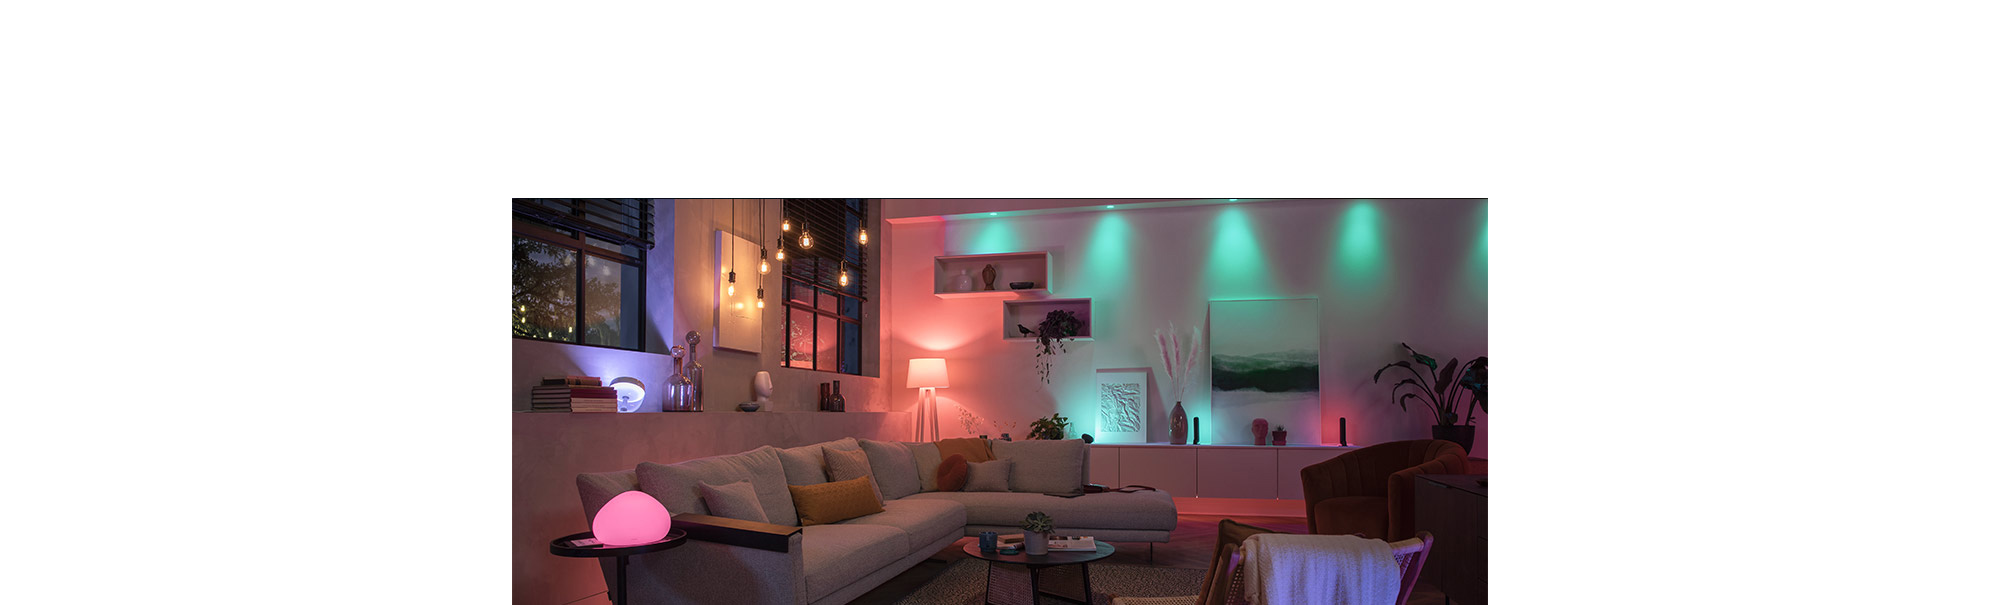 Lights in living space